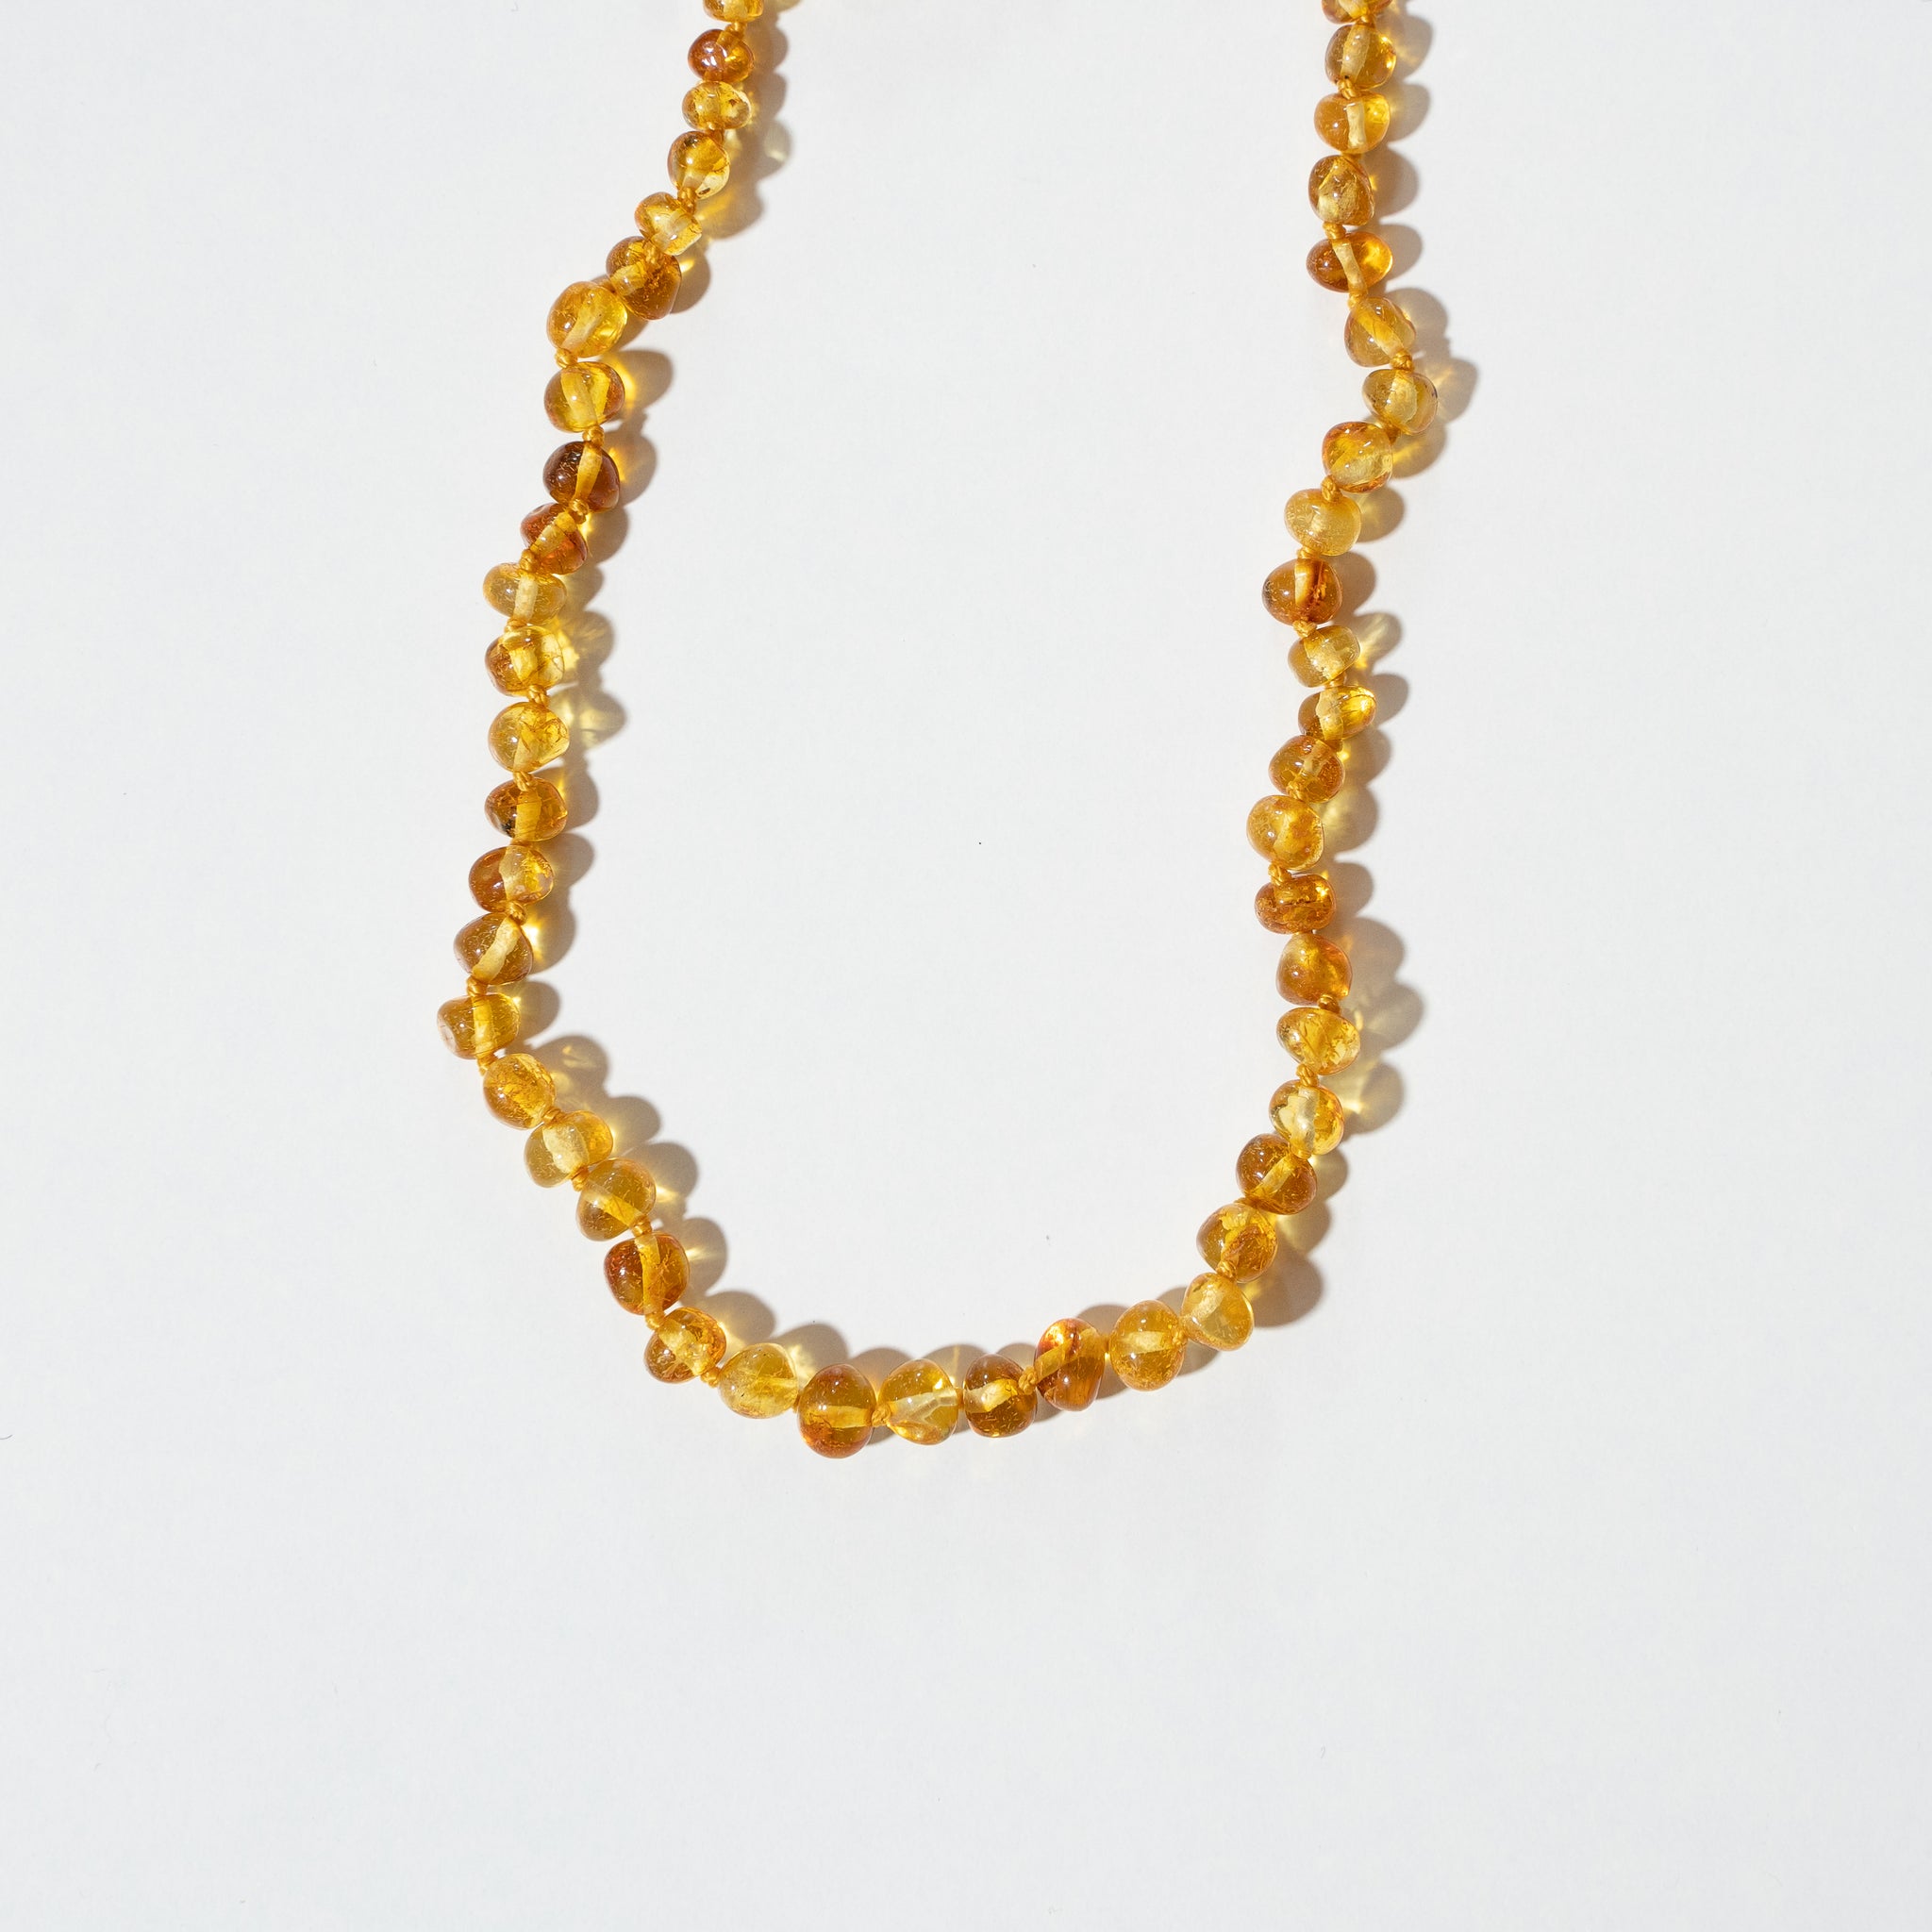 5 Benefits of Amber Necklace Why Your Baby Should Have One